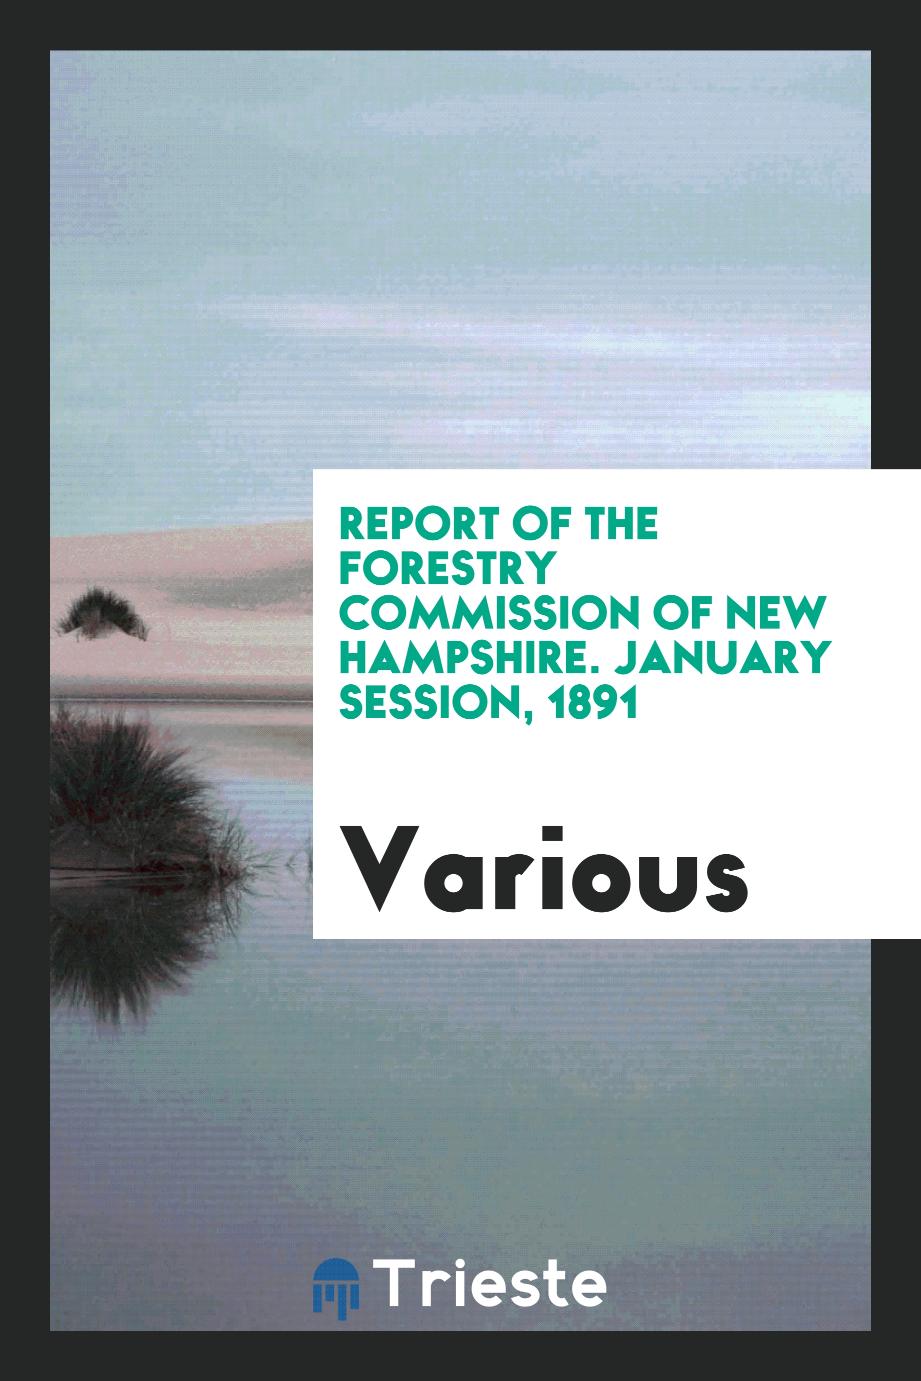 Report of the Forestry Commission of new Hampshire. January session, 1891